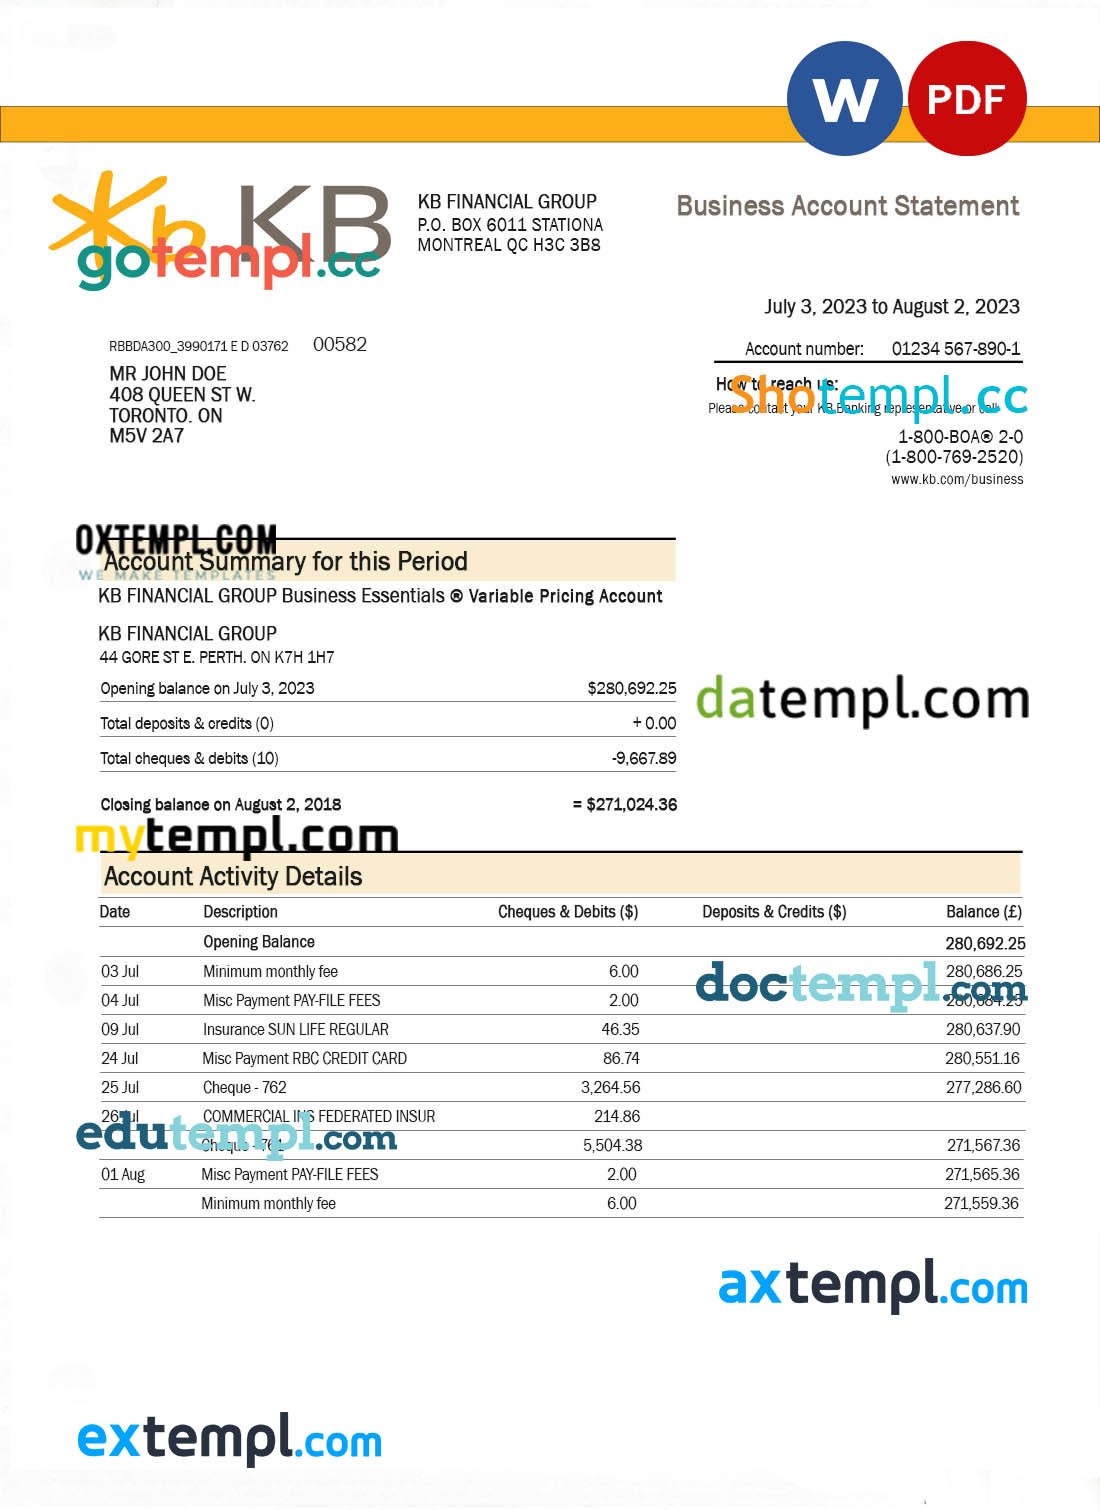 KB Financial Group bank company checking account statement Word and PDF template